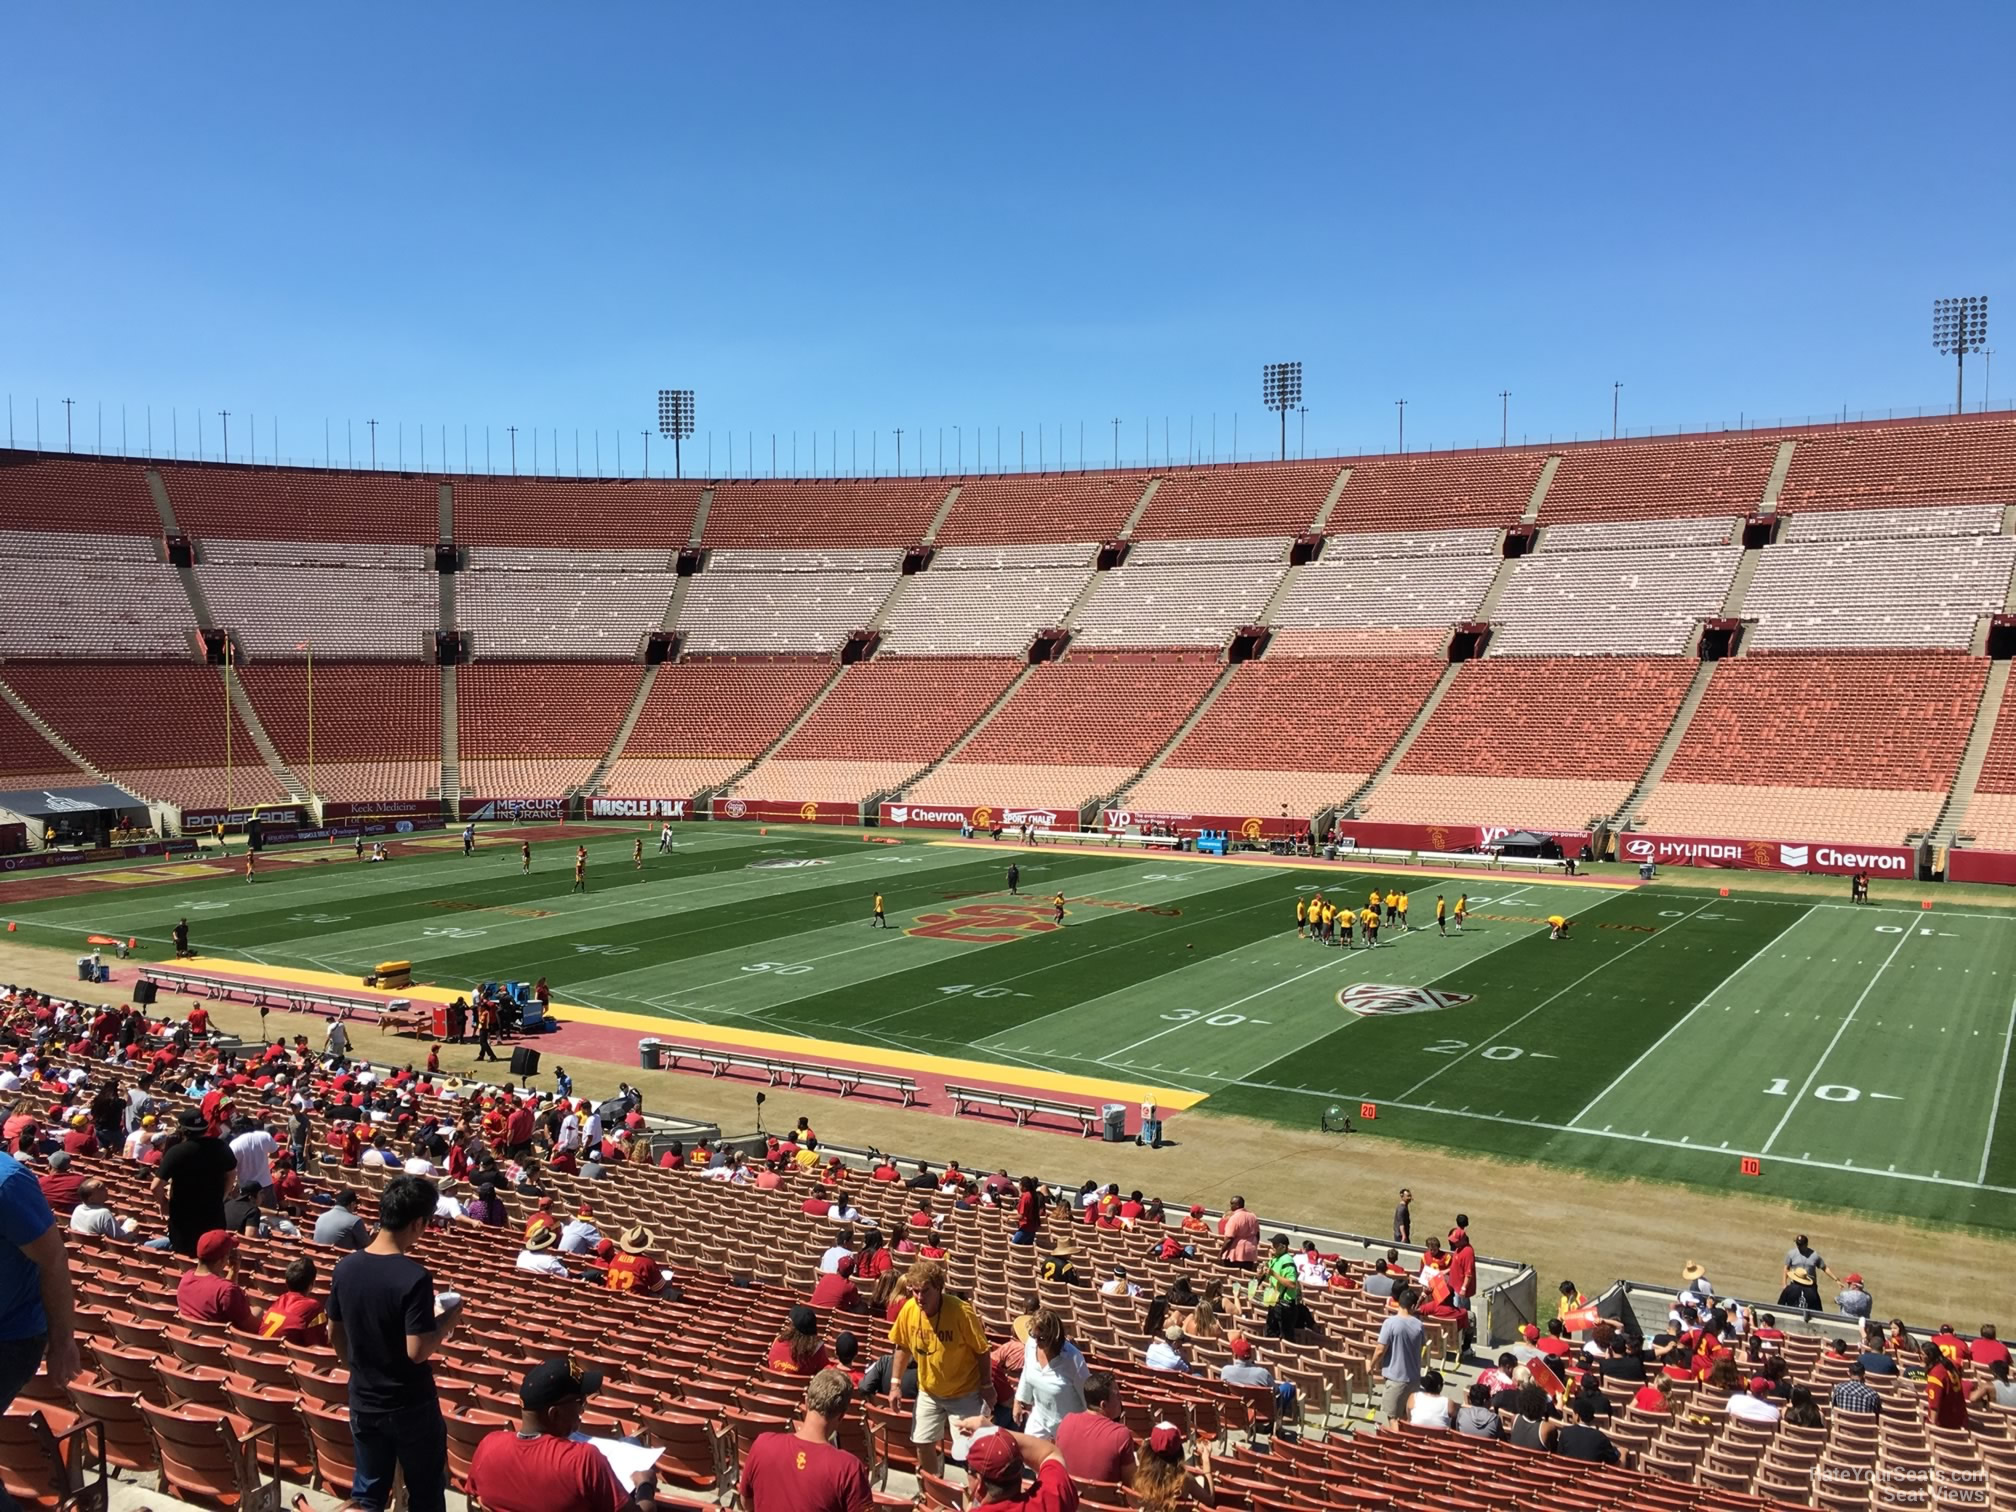 section 204a, row 4 seat view  - los angeles memorial coliseum